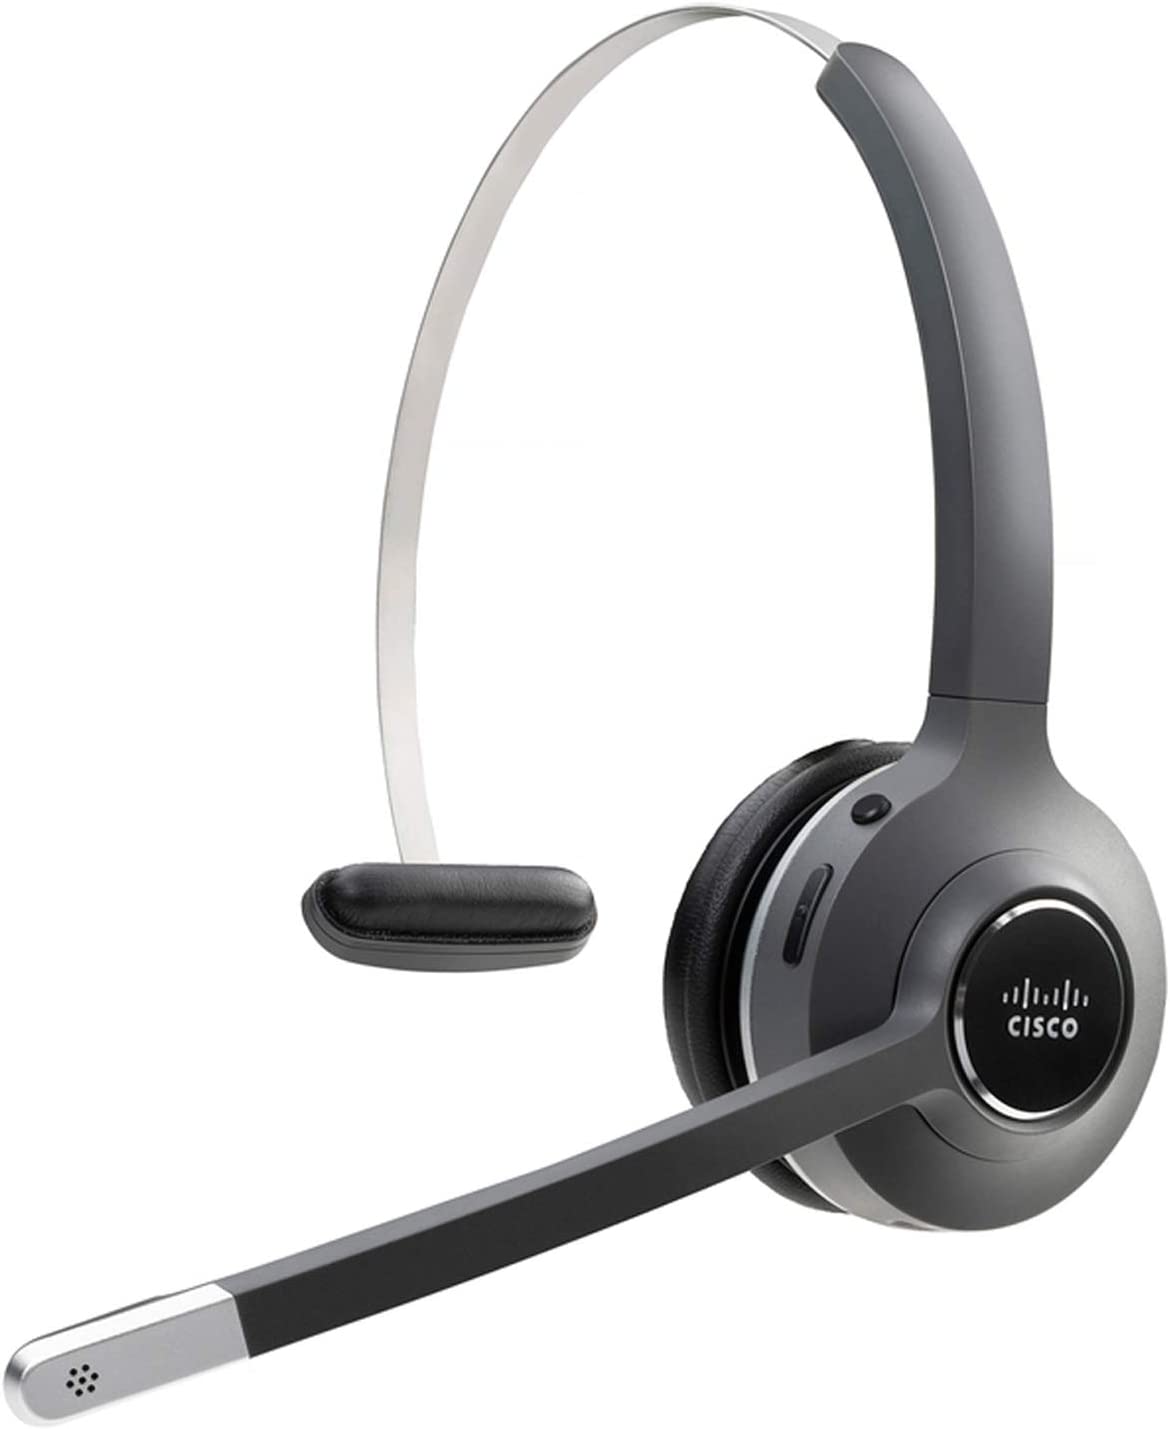 Best noise cancelling headsets for call centers